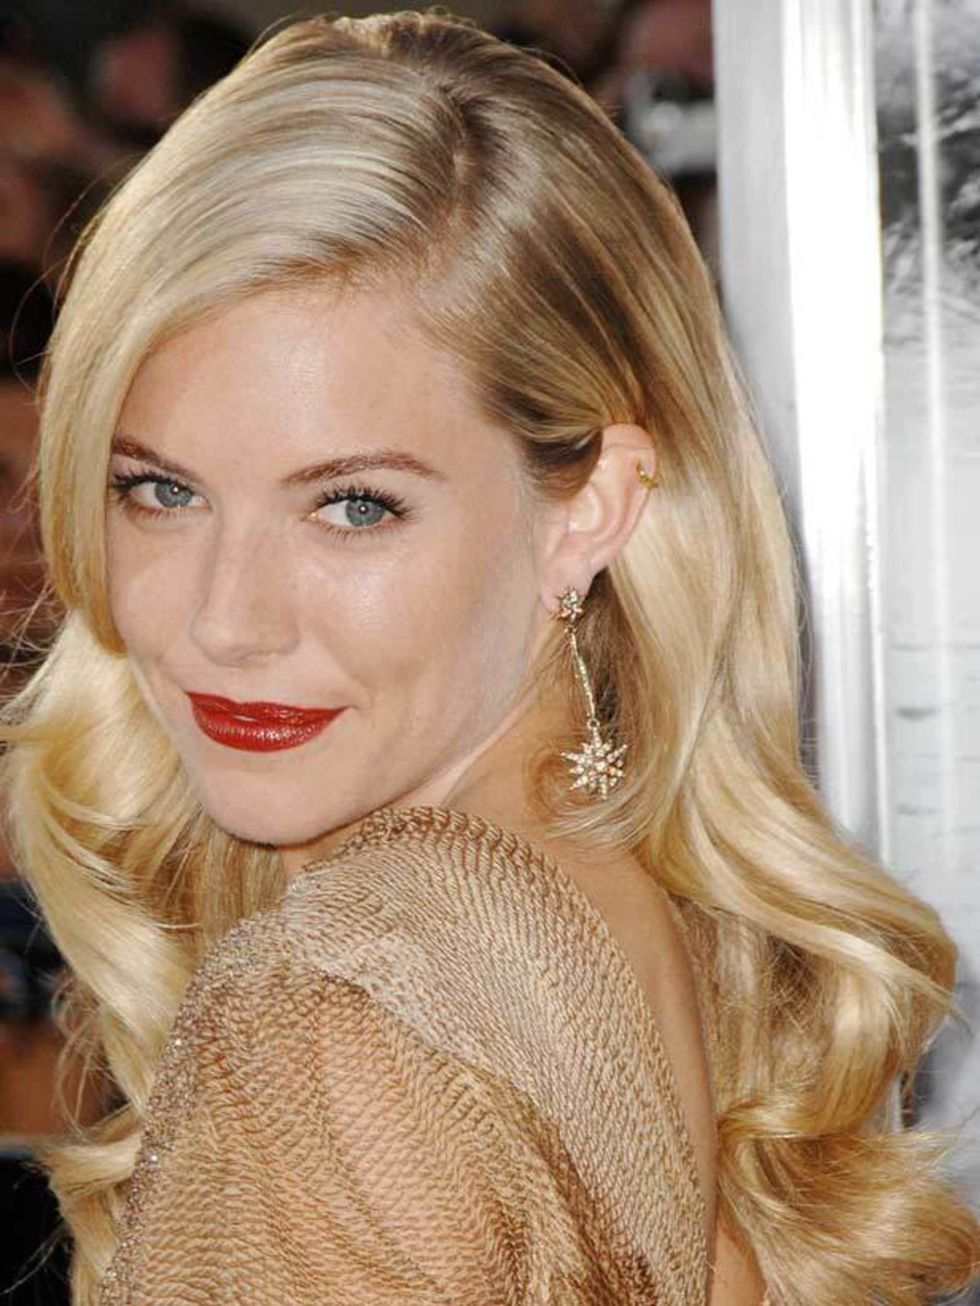 <p><a href="http://www.elleuk.com/beauty/celeb-beauty/celeb-beauty-bags/%28section%29/sienna-miller-favourite-beauty-buys">Click here to see Sienna Miller's favourite beauty buys</a></p>